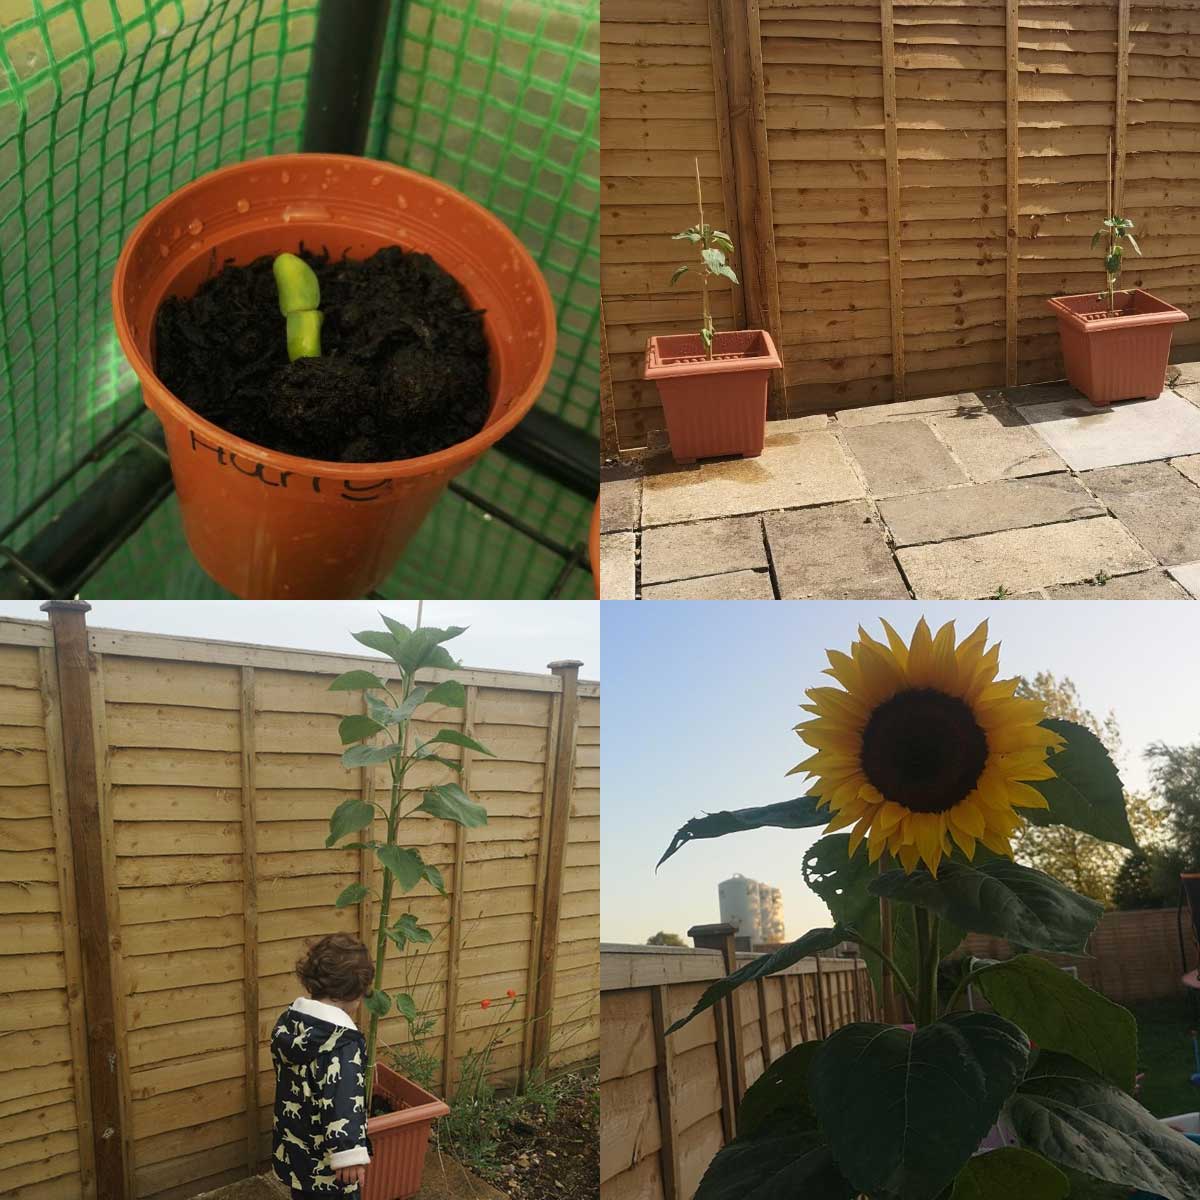 This photograph shows a Sunflower grown from sunflower seed in various stages